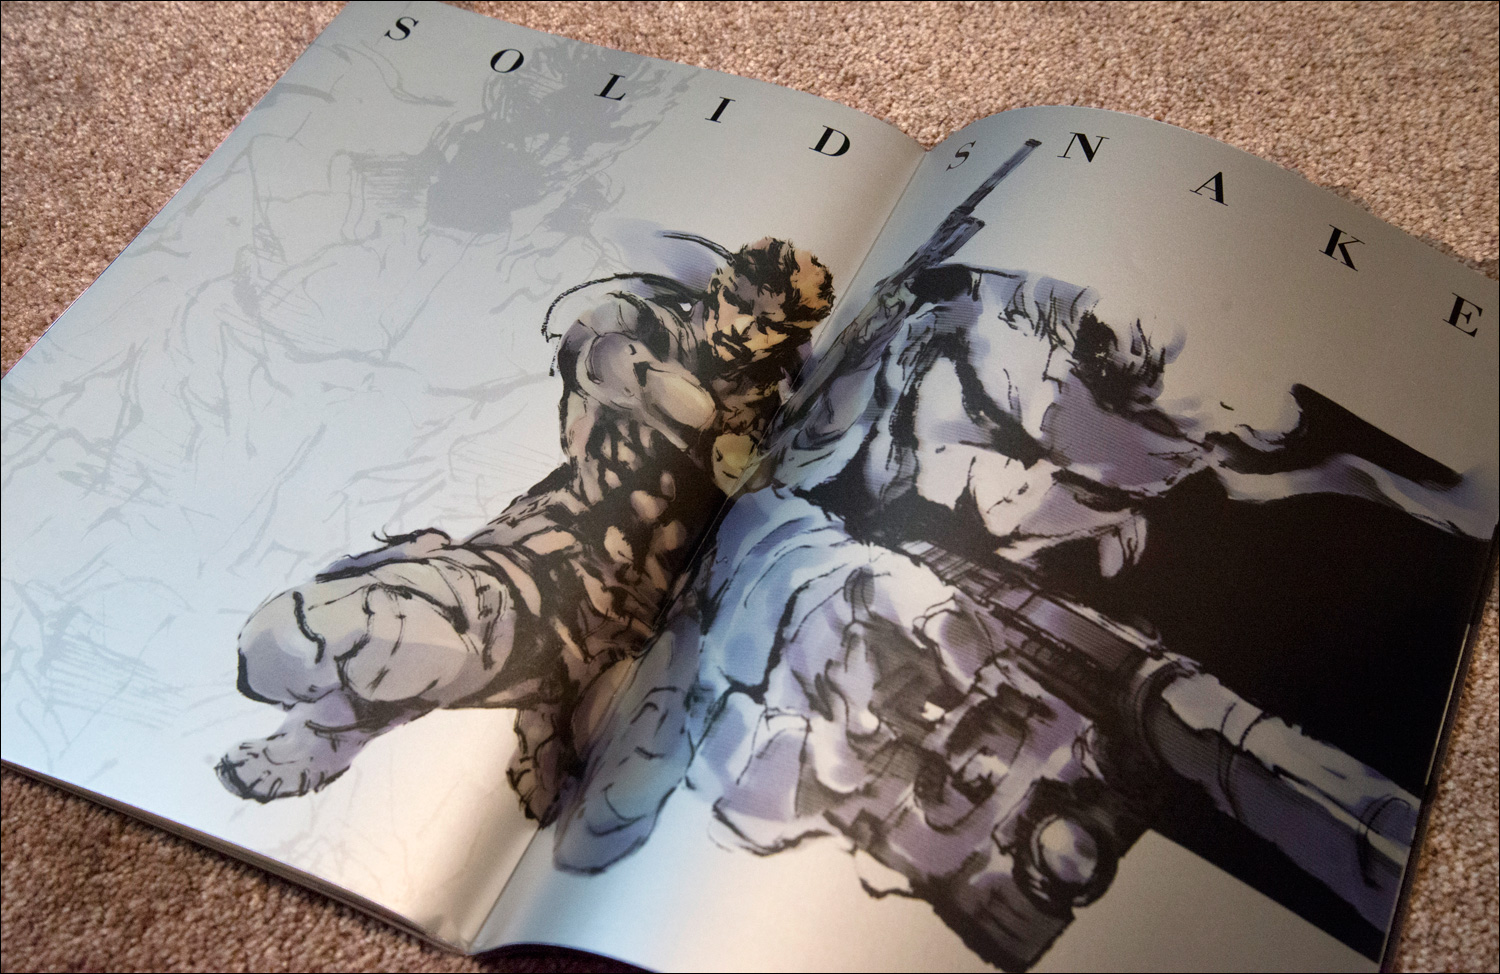 Metal-Gear-Solid-Premium-Package-Classified-Book-Solid-Snake